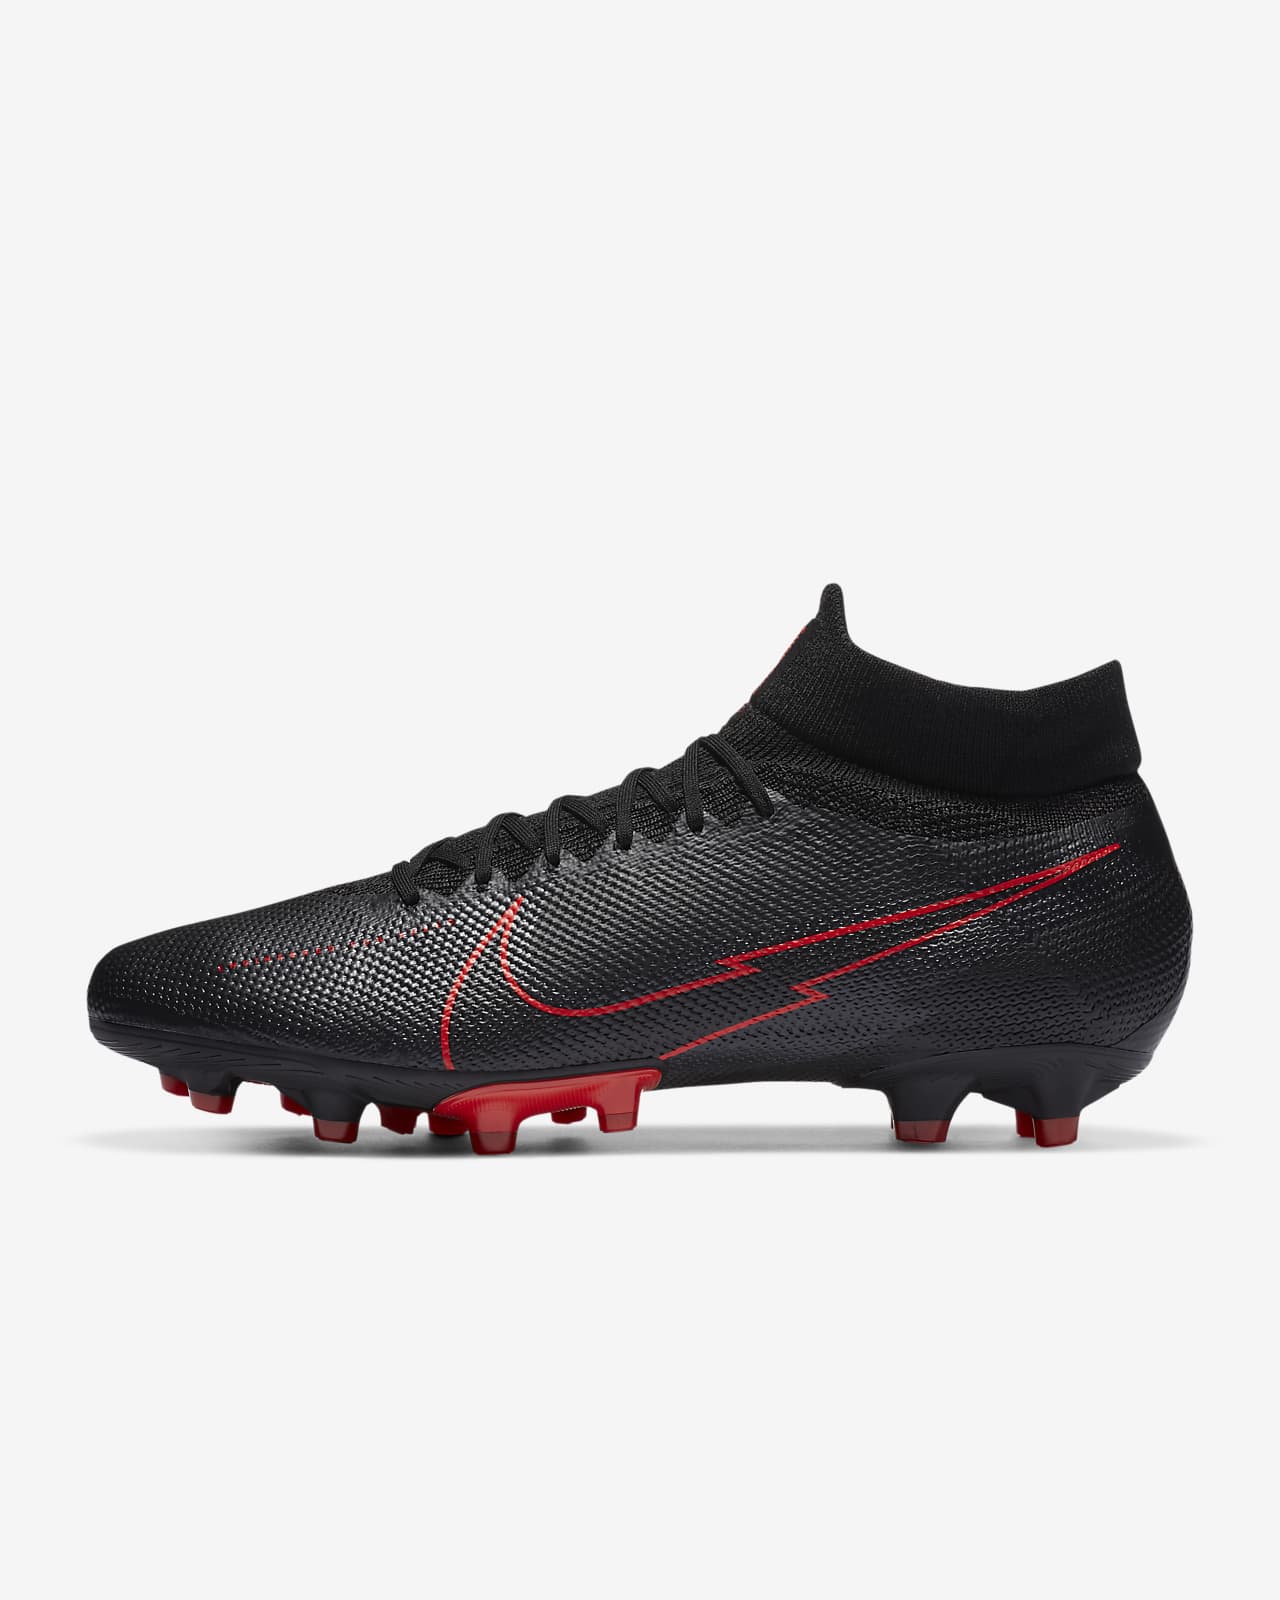 Nike Mercurial Superfly 7 Pro AG-PRO Artificial-Grass Football Boot. Nike LU